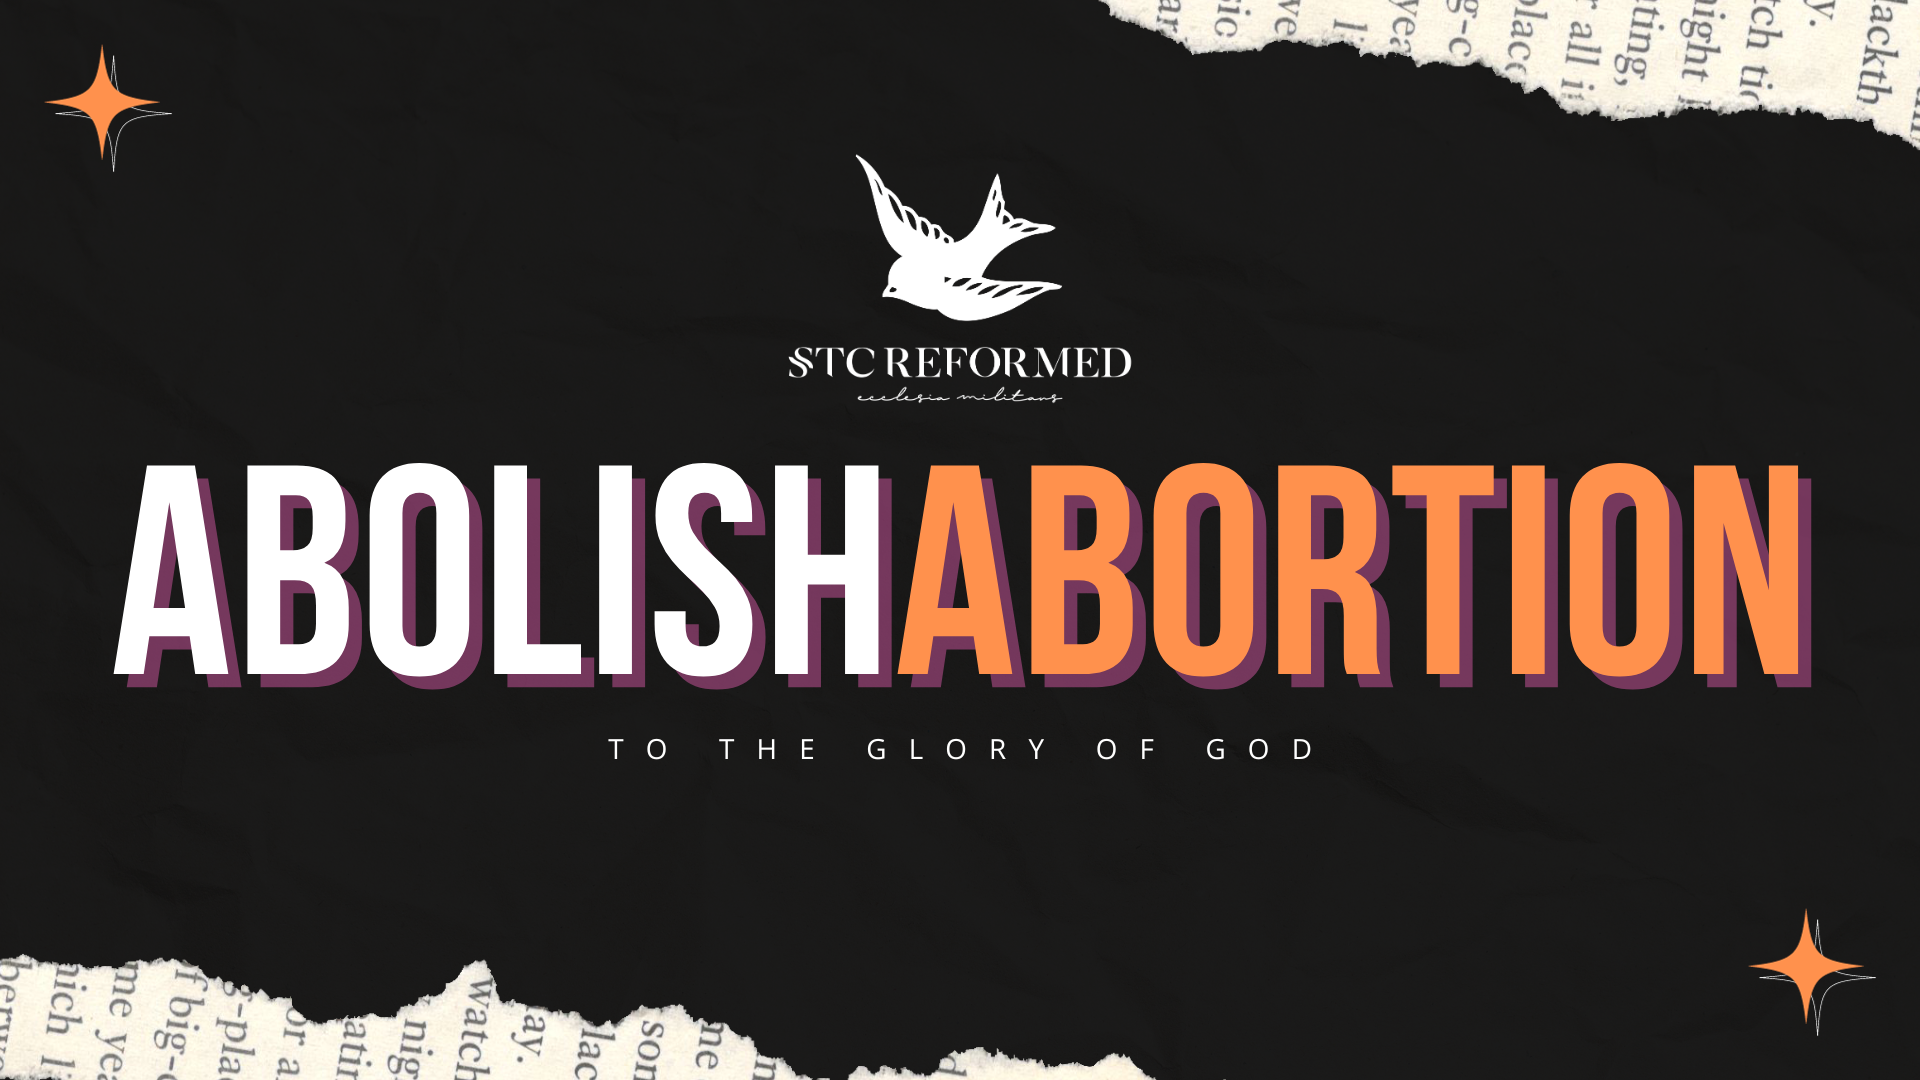 <span class="hpt_headertitle">Abolish Abortion: Death Cult Ministry</span>